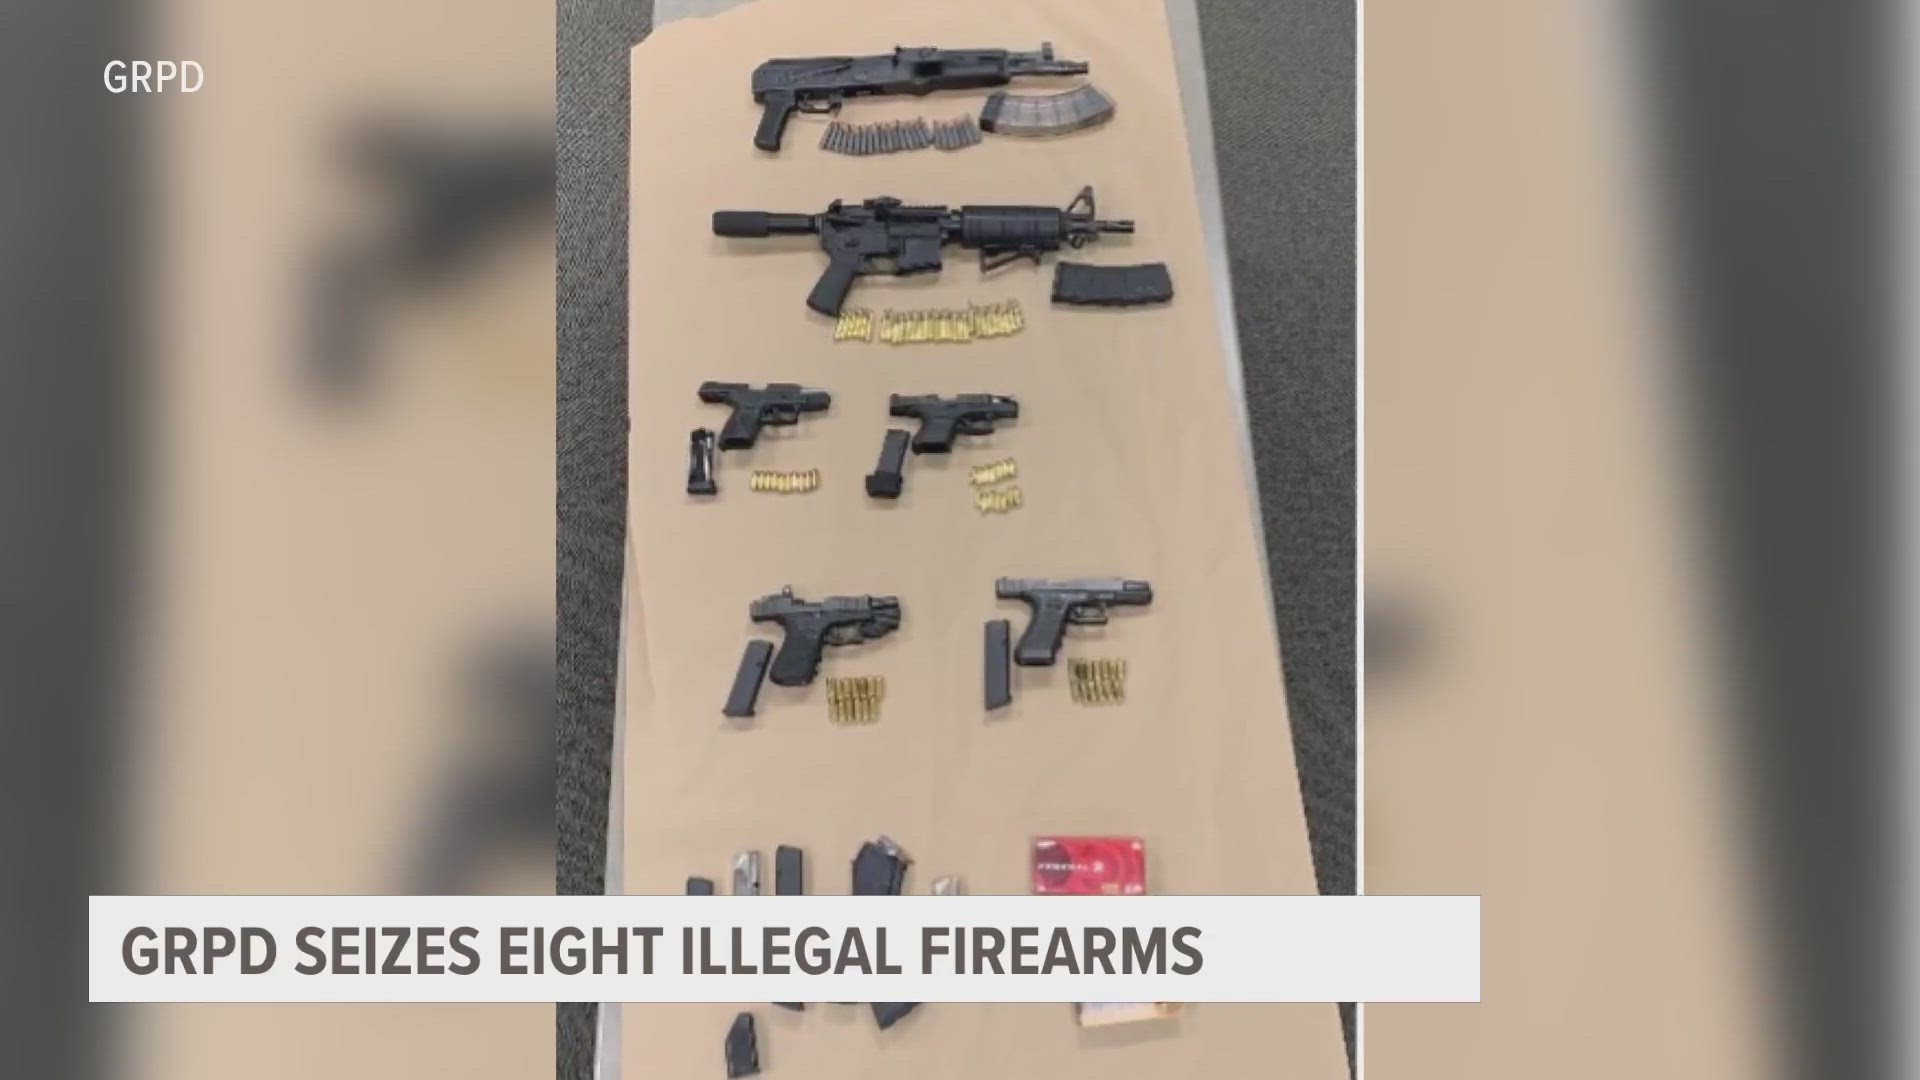 Over the weekend Grand Rapids police conducted a high-risk traffic stop that resulted in several guns and rounds of ammunition being taken off the streets.